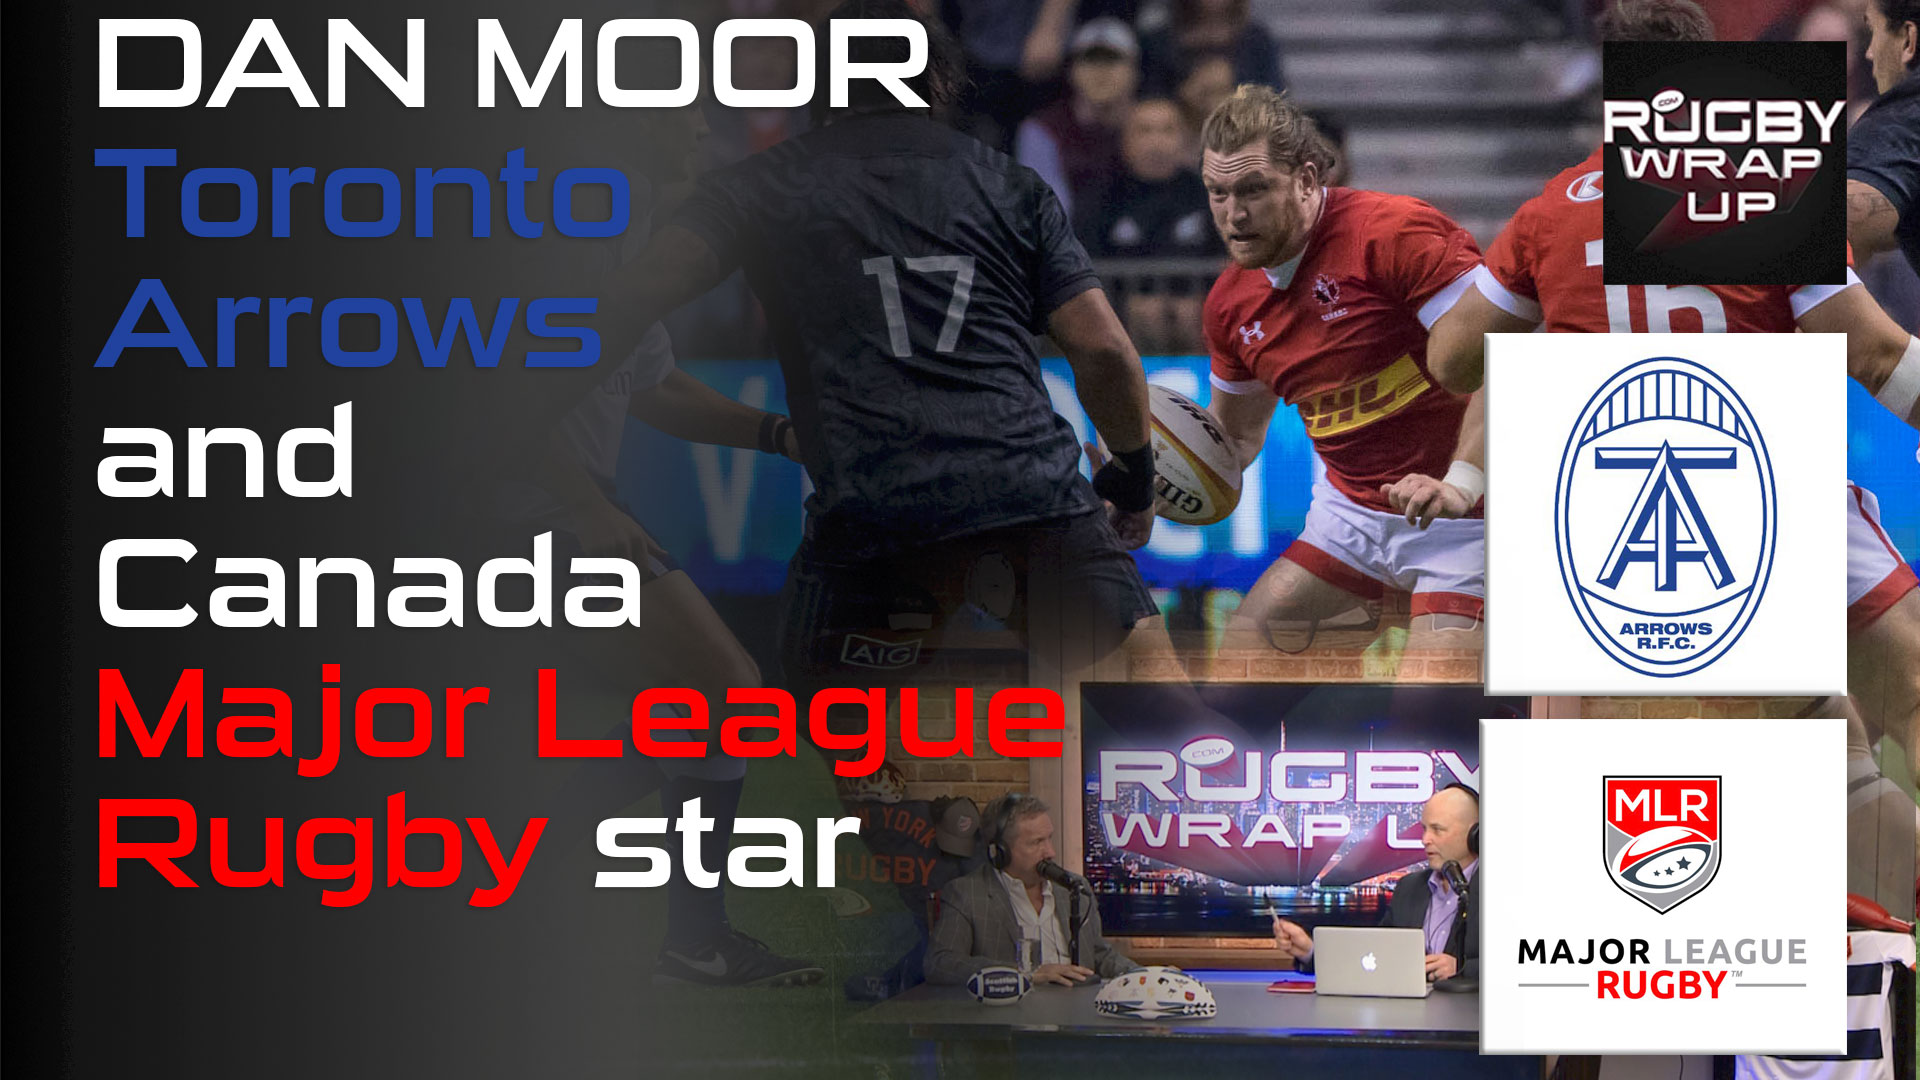 Rugby TV and Podcast: Major League Rugby: Toronto Arrows, Oxford & Rugby Canada Star Dan Moor, Rugby_Wrap_Up